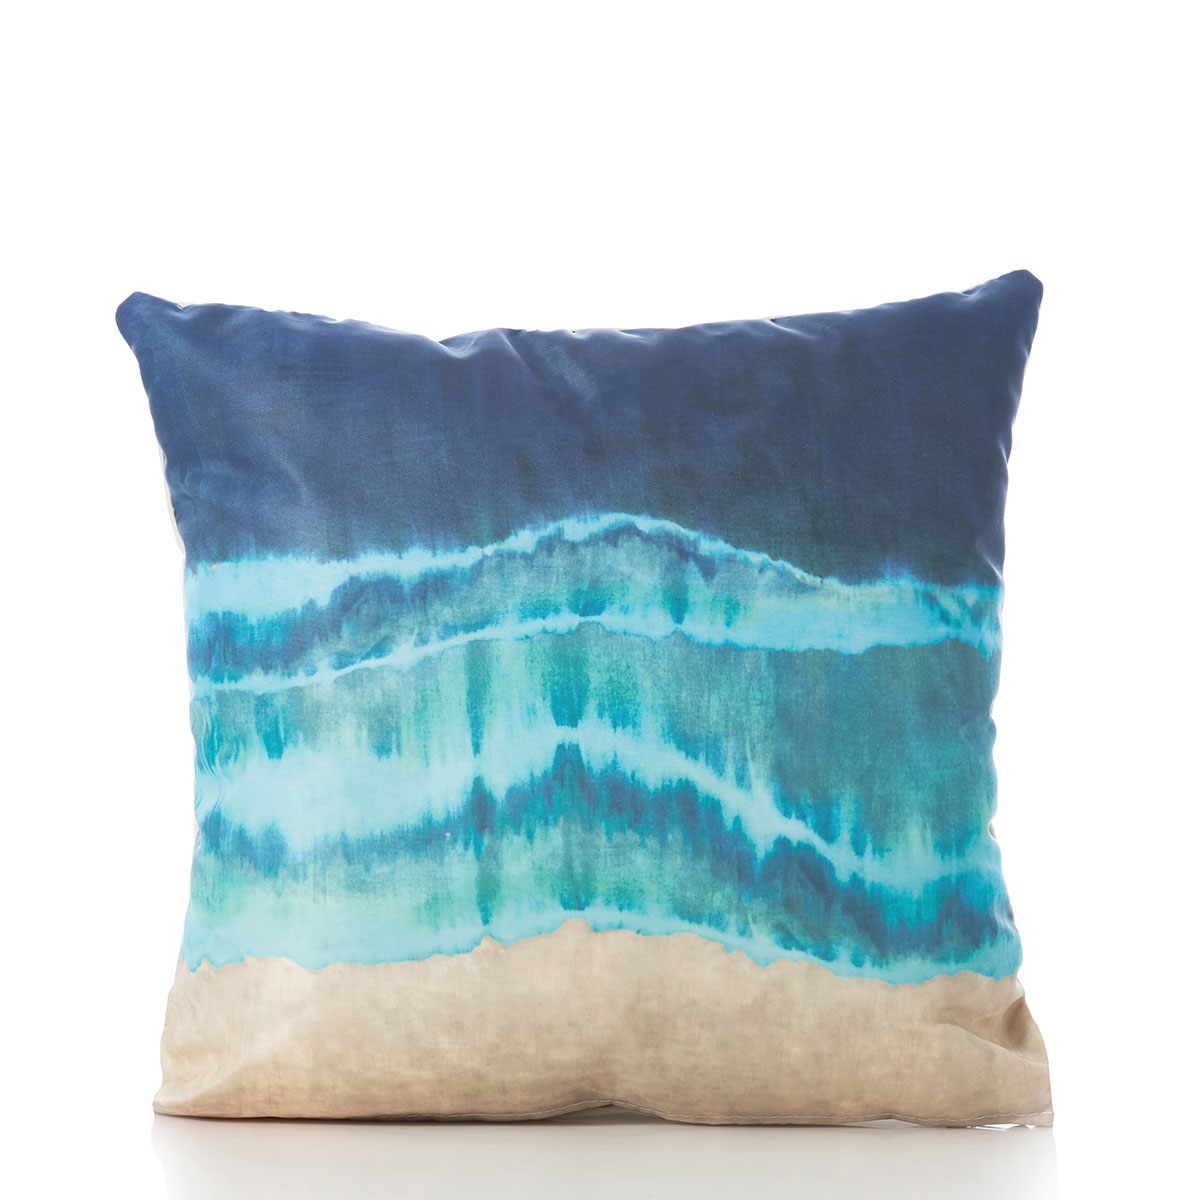 a recycled sail cloth pillow is printed with stripes of tan, teal, and blue depicting waves washing onshore